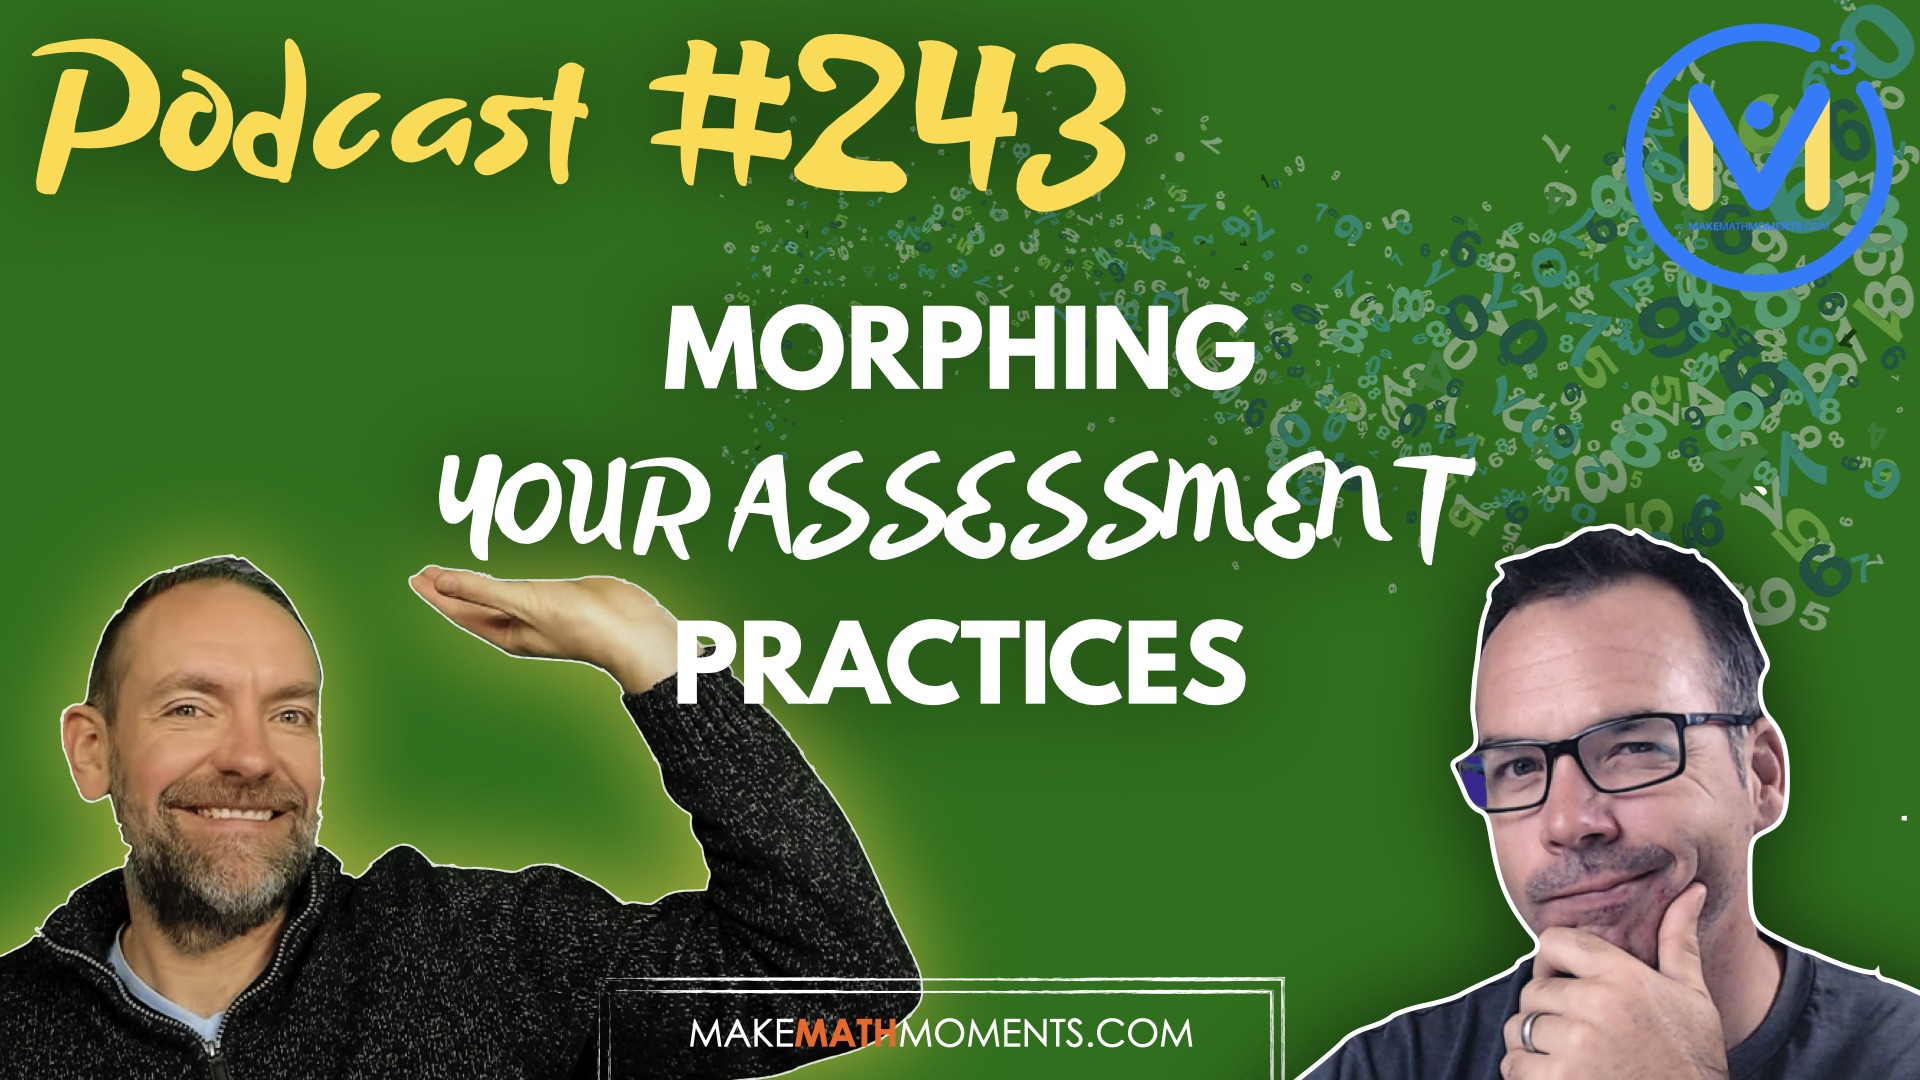 Episode 243: [REPLAY] Morphing Your Assessment Practices – A Math Mentoring Moment